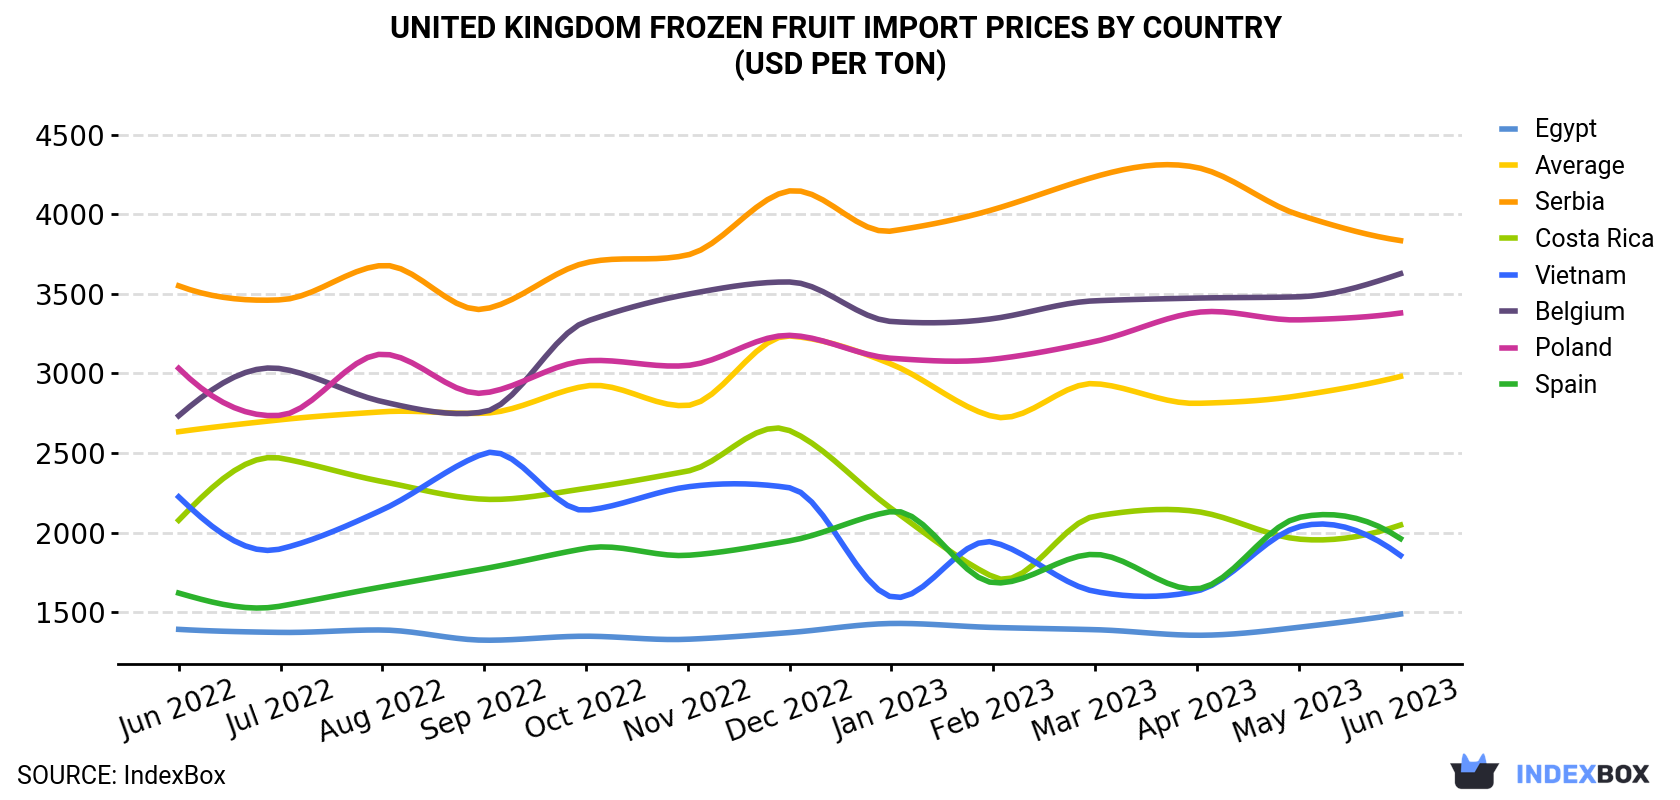 United Kingdom Frozen Fruit Import Prices By Country (USD Per Ton)